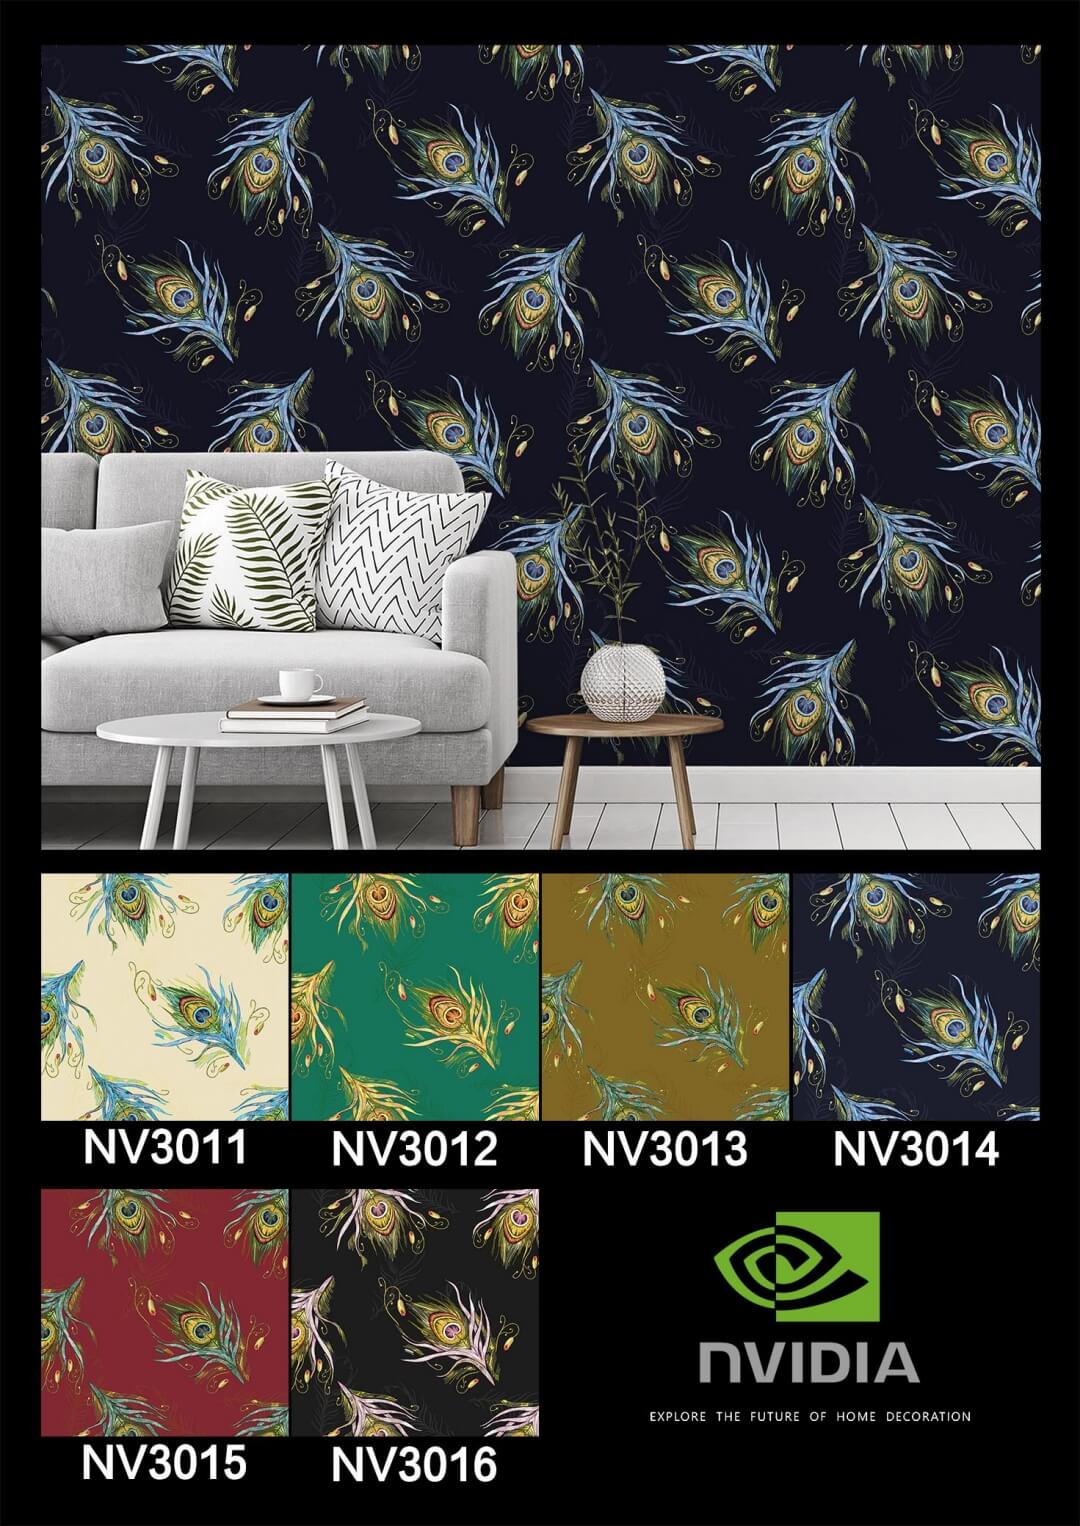 3D Waterproof Home Wallpaper at Lowest Price (15)